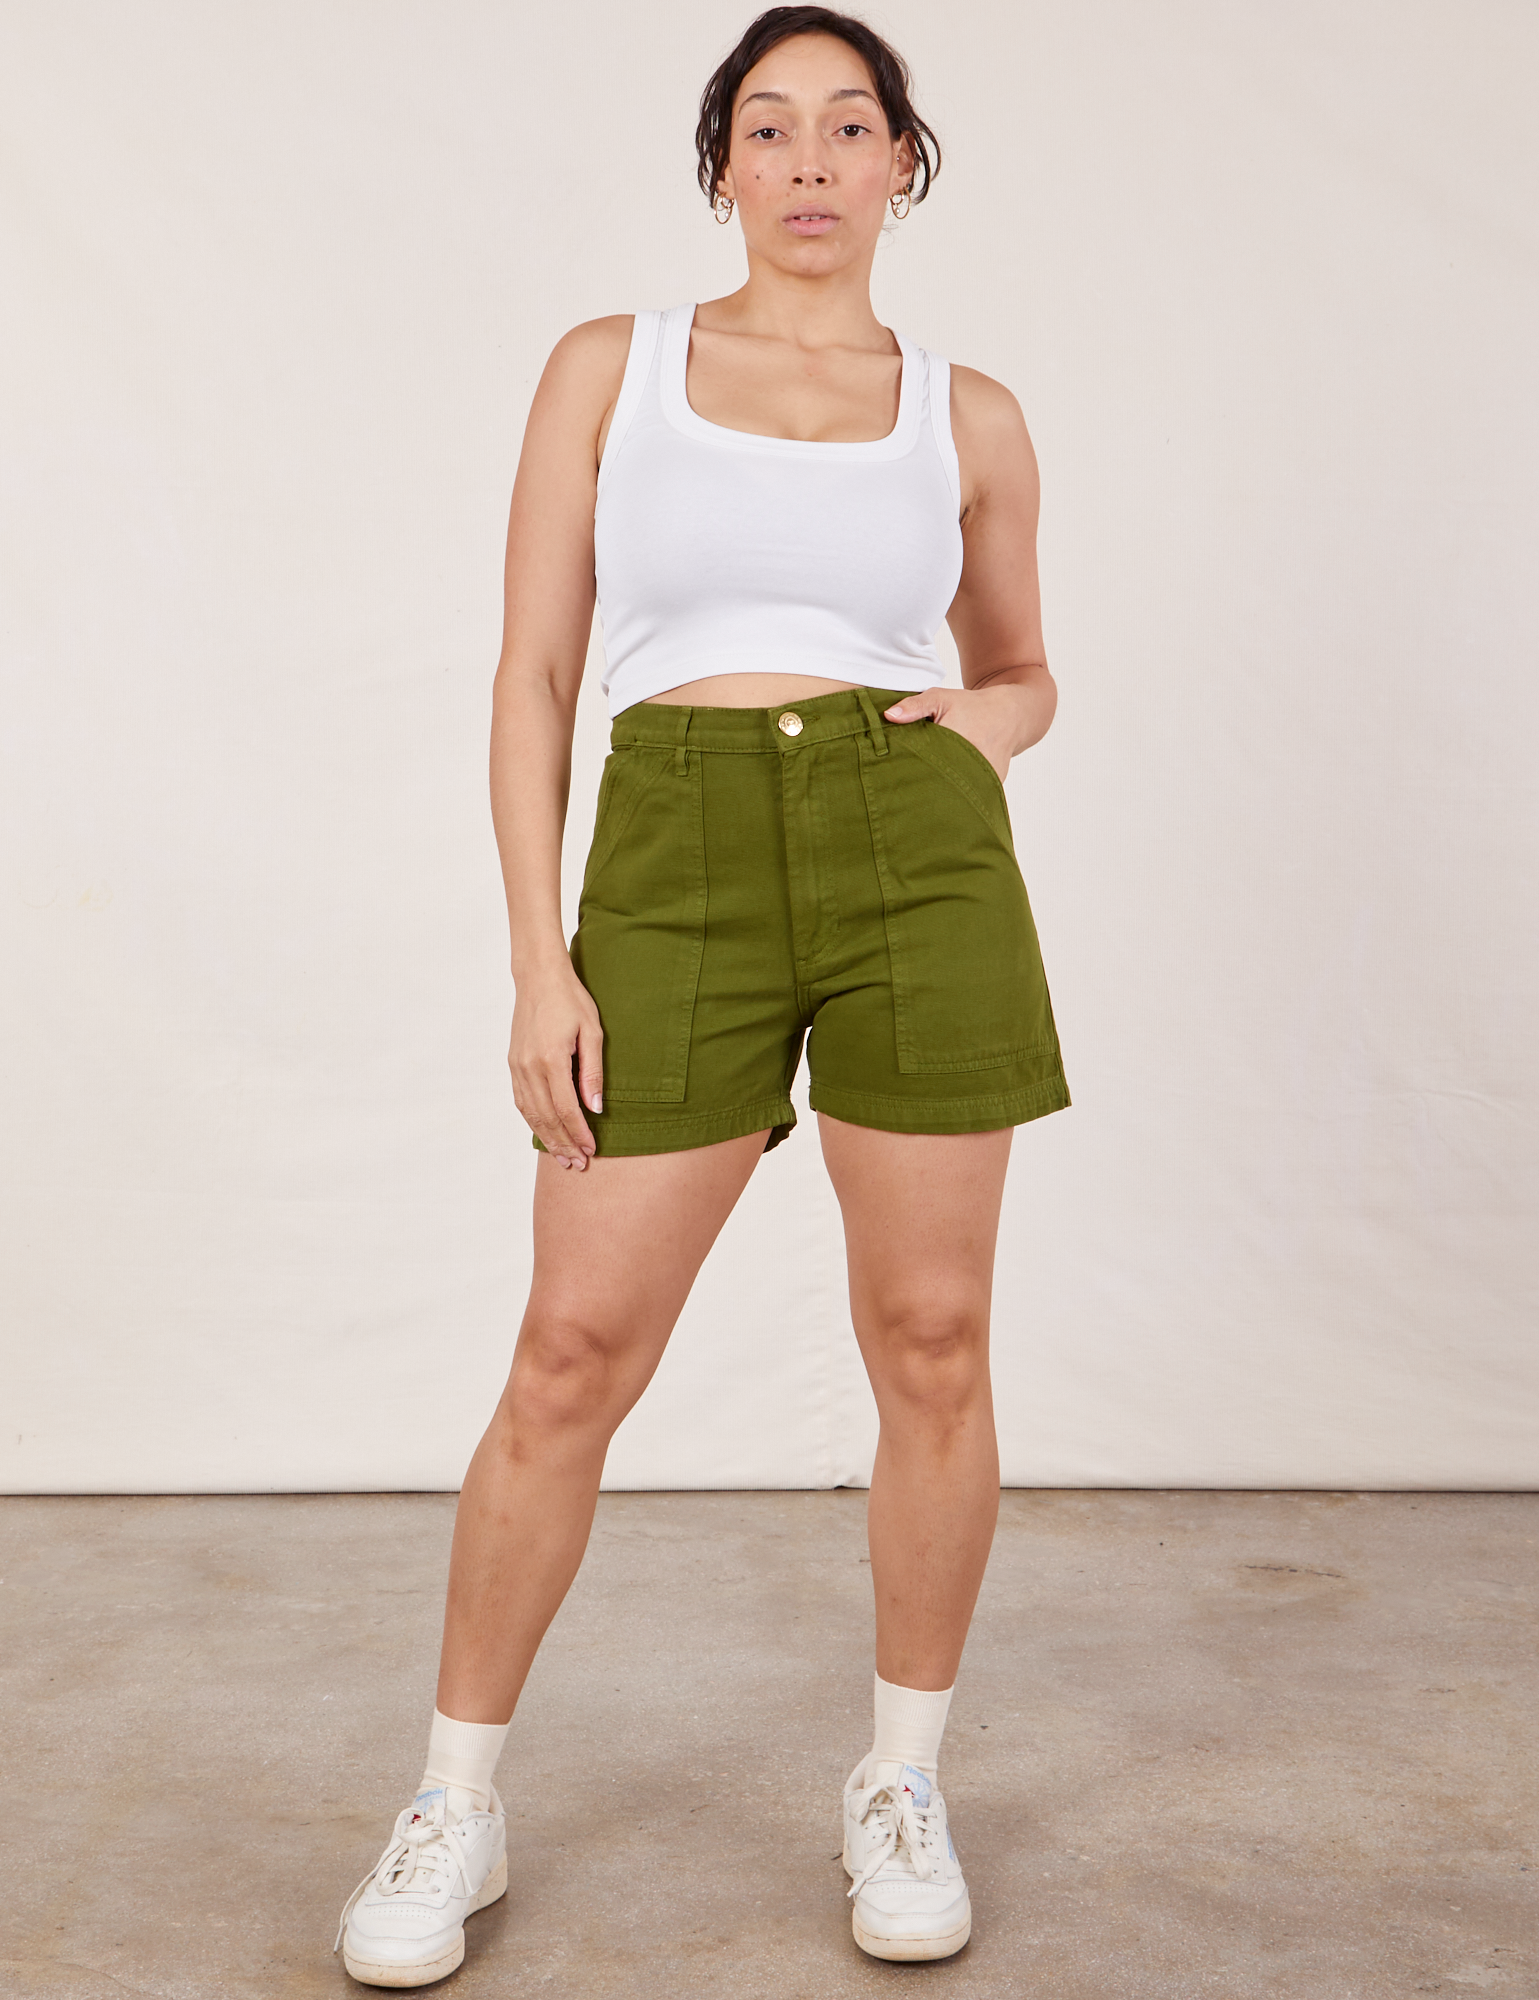 Tiara is 5’4” and wearing S Classic Work Shorts in Summer Olive paired with a Cropped Tank Top in vintage tee off-white